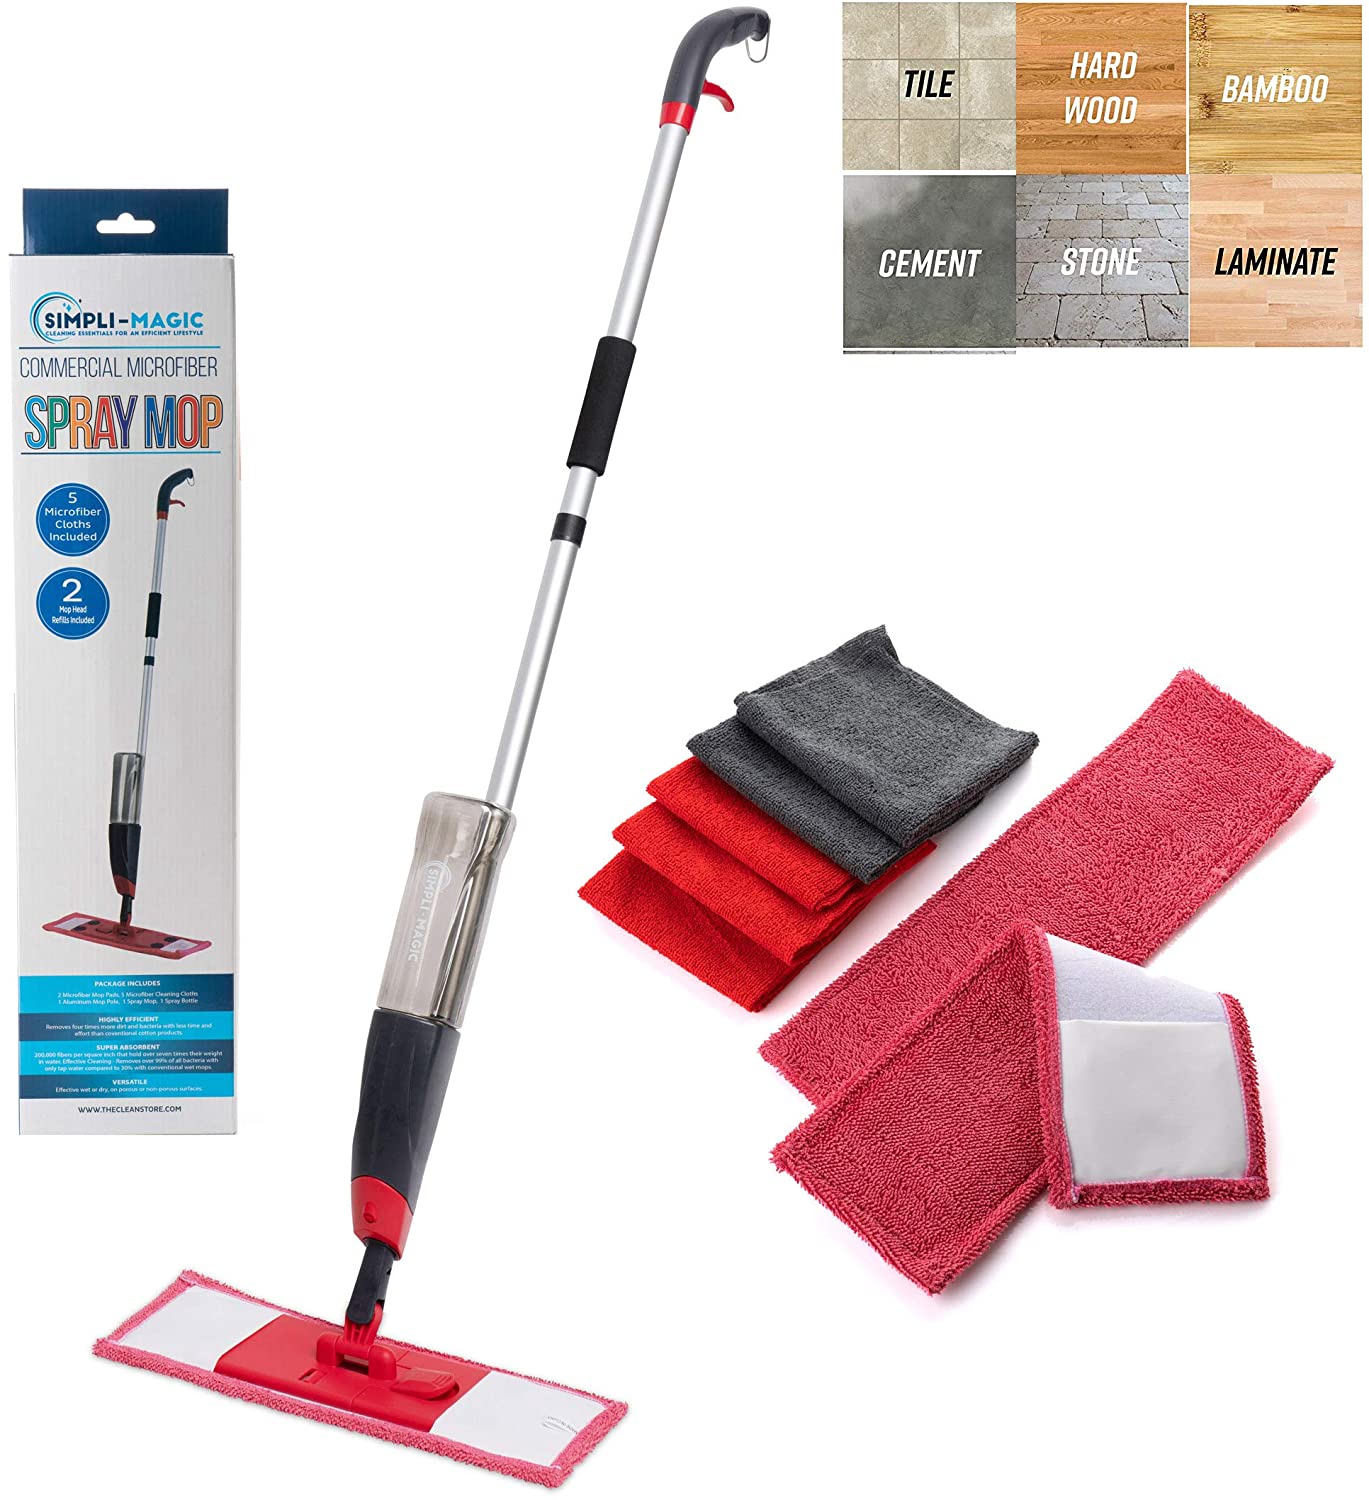  Rubbermaid Microfiber Reveal Spray Mop Floor Cleaning Kit with  3 Microfiber Wet Pads, 1 Solution Refillable Bottles for Wet & Dry Use,  Washable & Reusable Pads, Cordless, for All Floor Types 